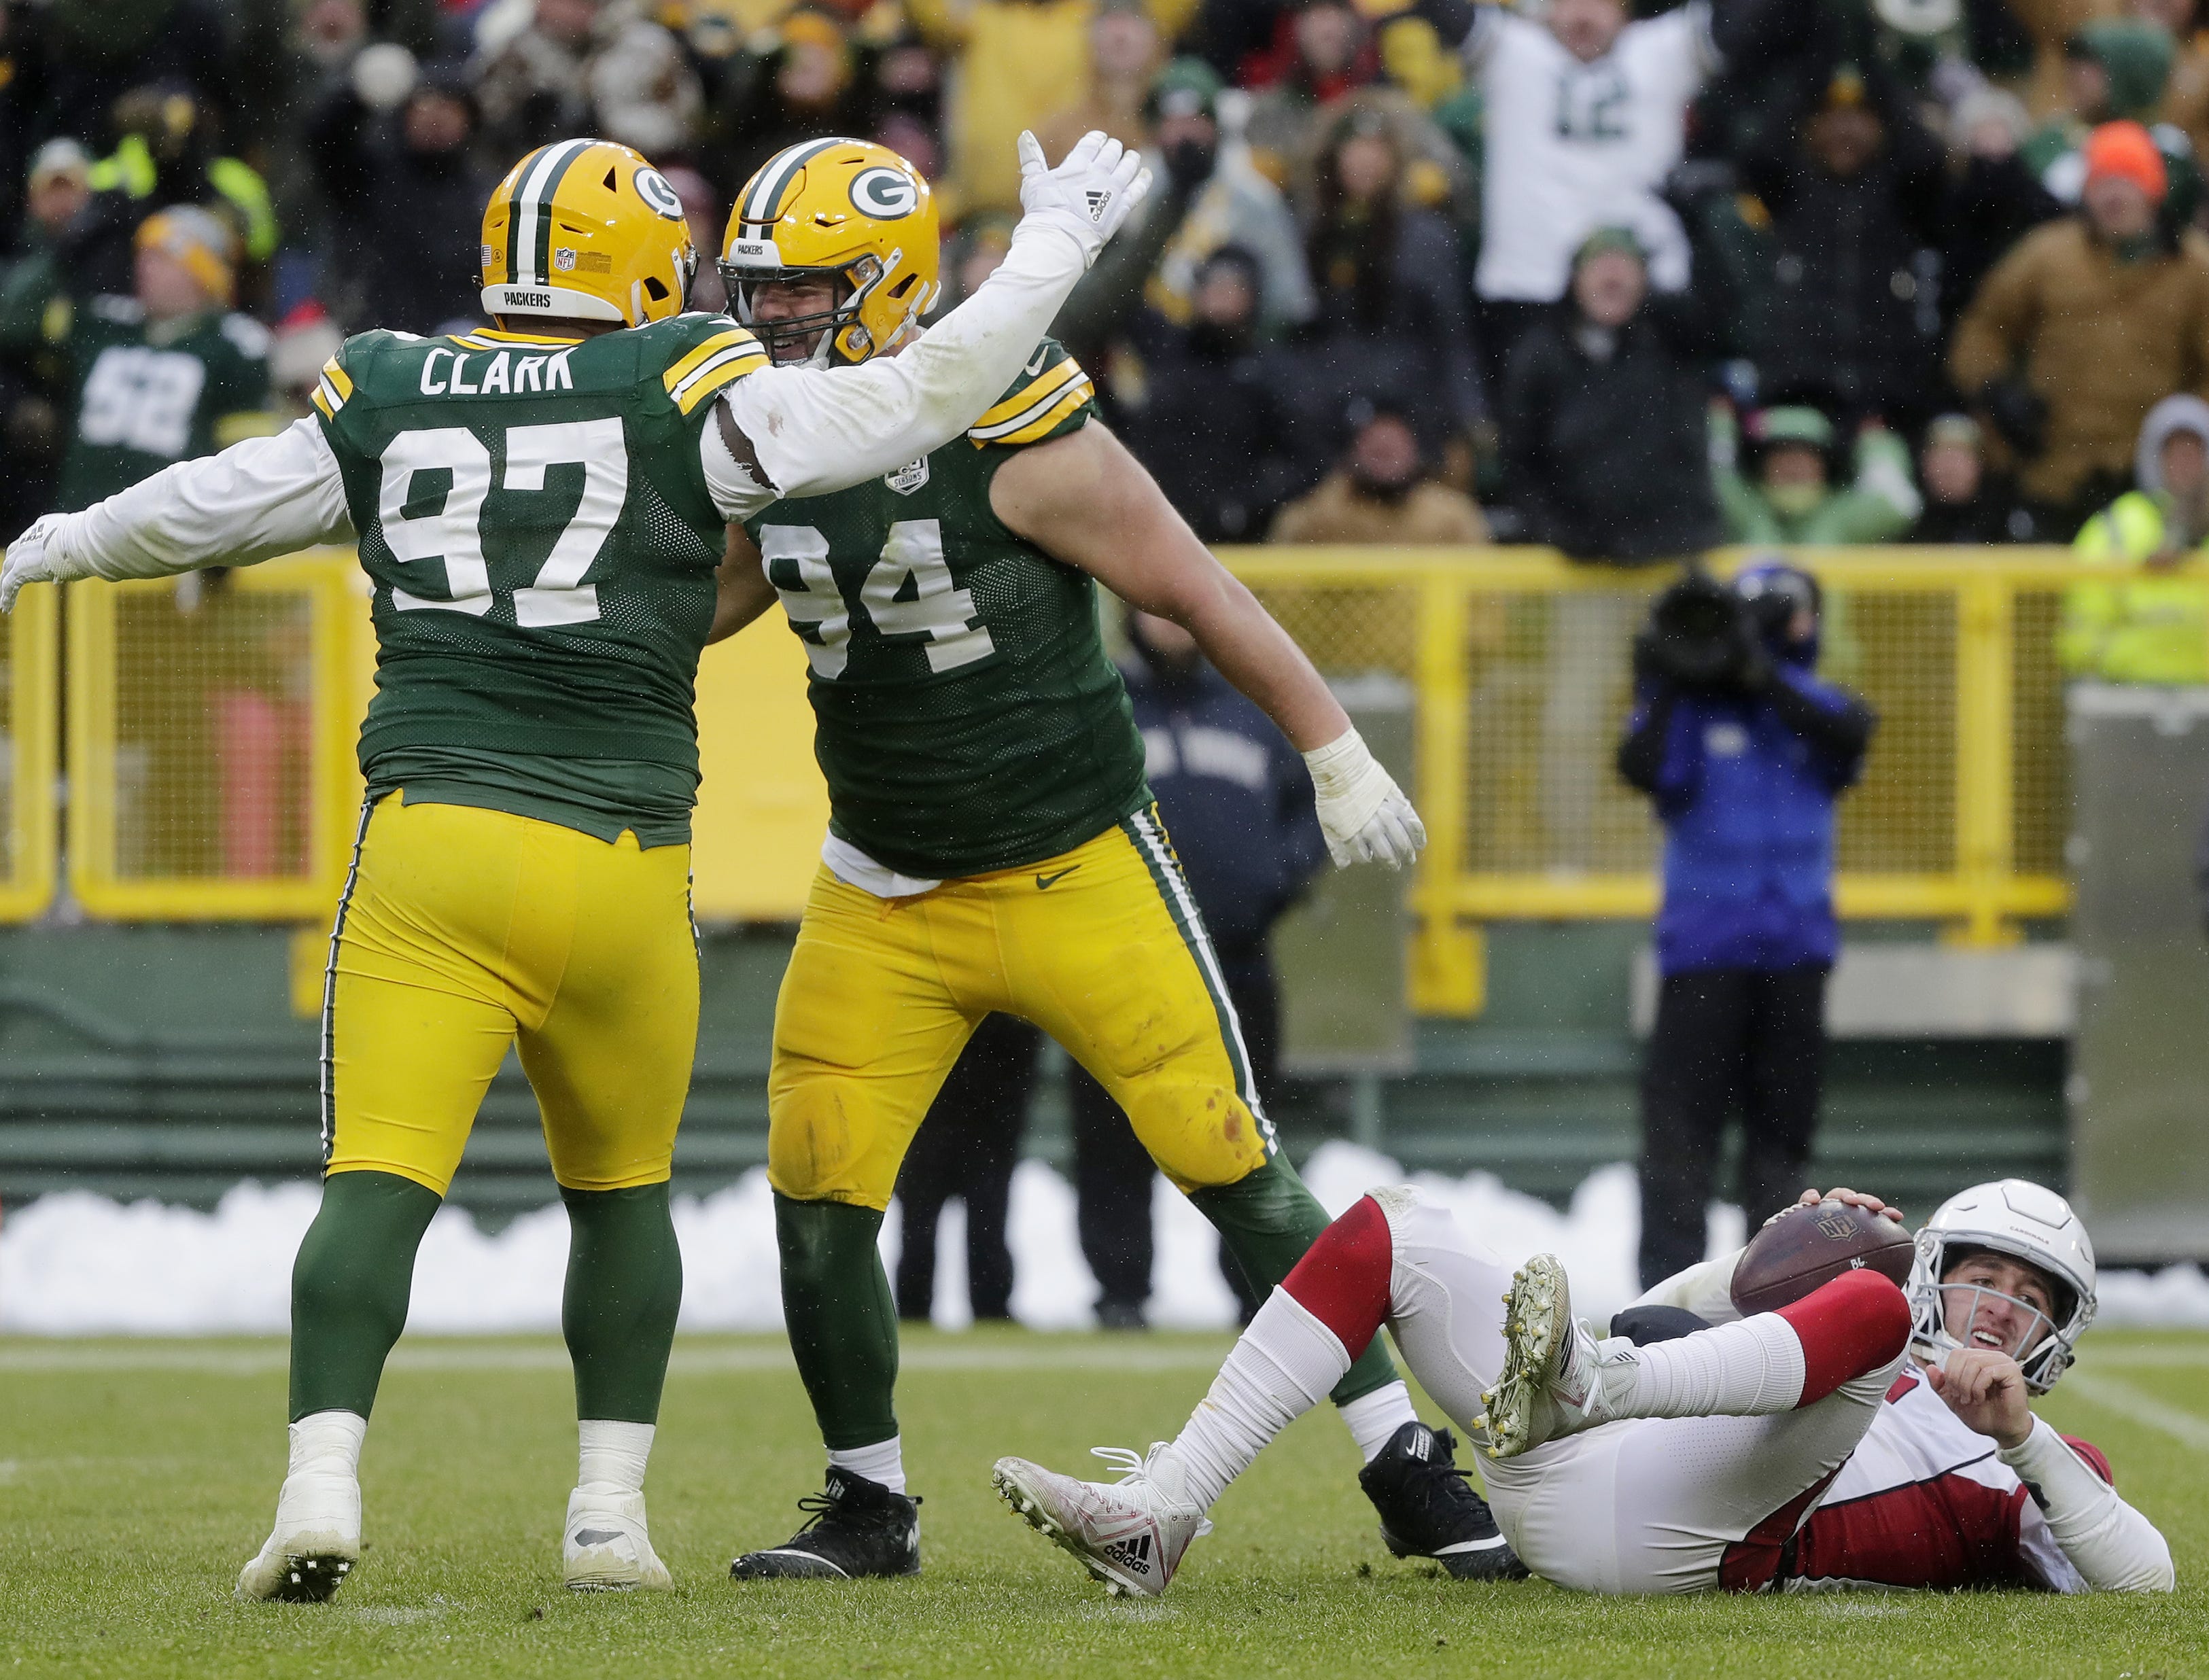 Green Bay Packers defensive end Dean Lowry (94) celebrates with nose tackle Kenny Clark (97) after sacking Arizona Cardinals quarterback Josh Rosen (3) in the fourth quarter at Lambeau Field on Sunday, December 2, 2018 in Green Bay, Wis.